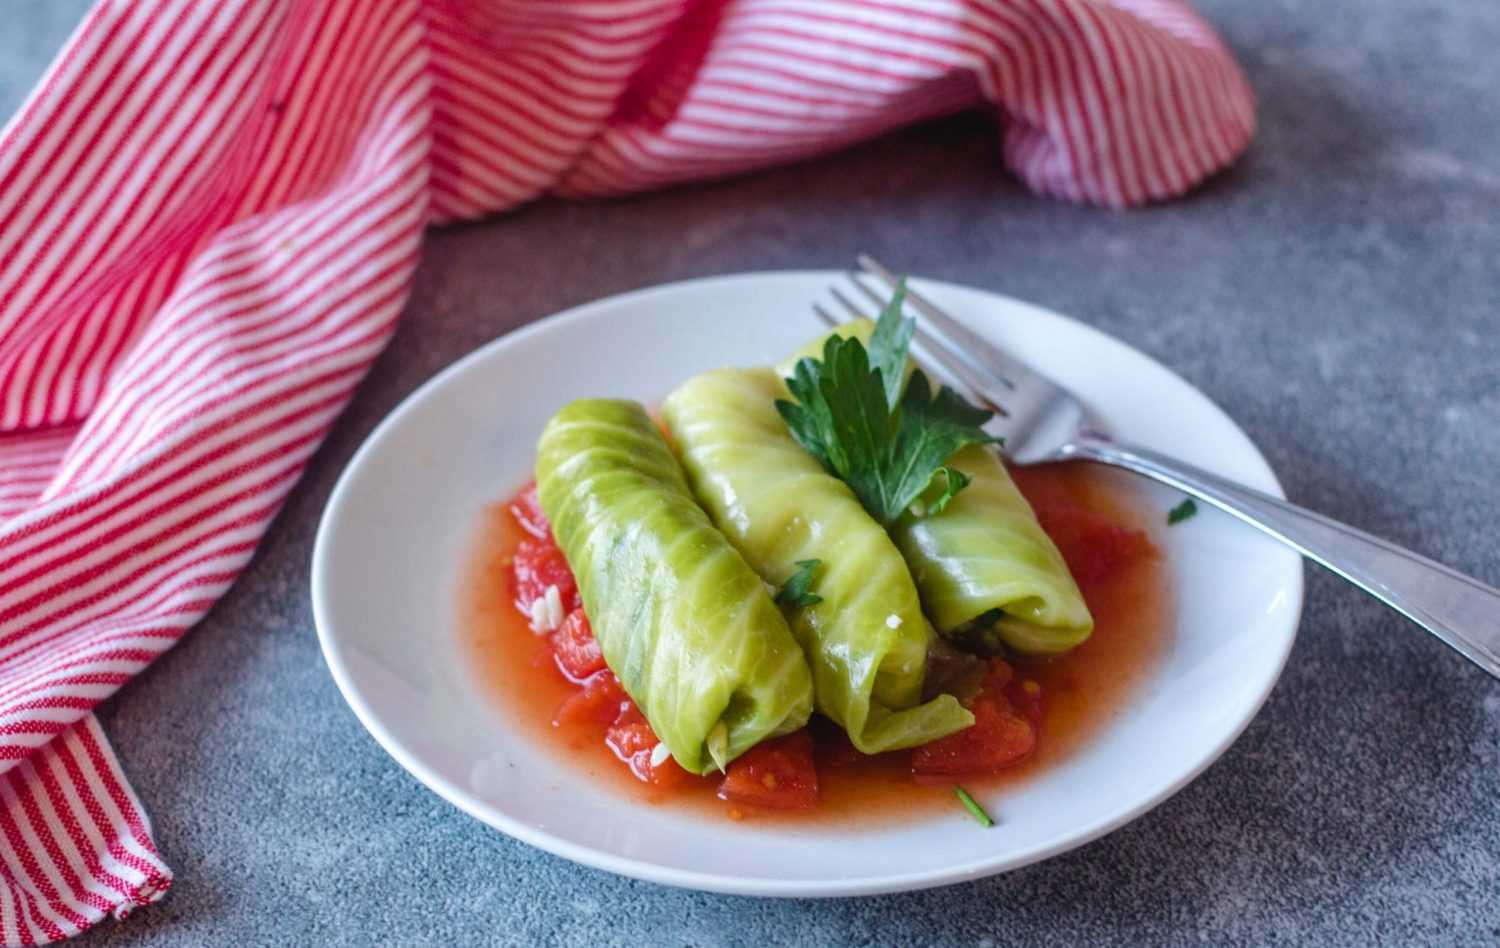 Cabbage rolls in tomato sauce topped with chopped parsley on white plate